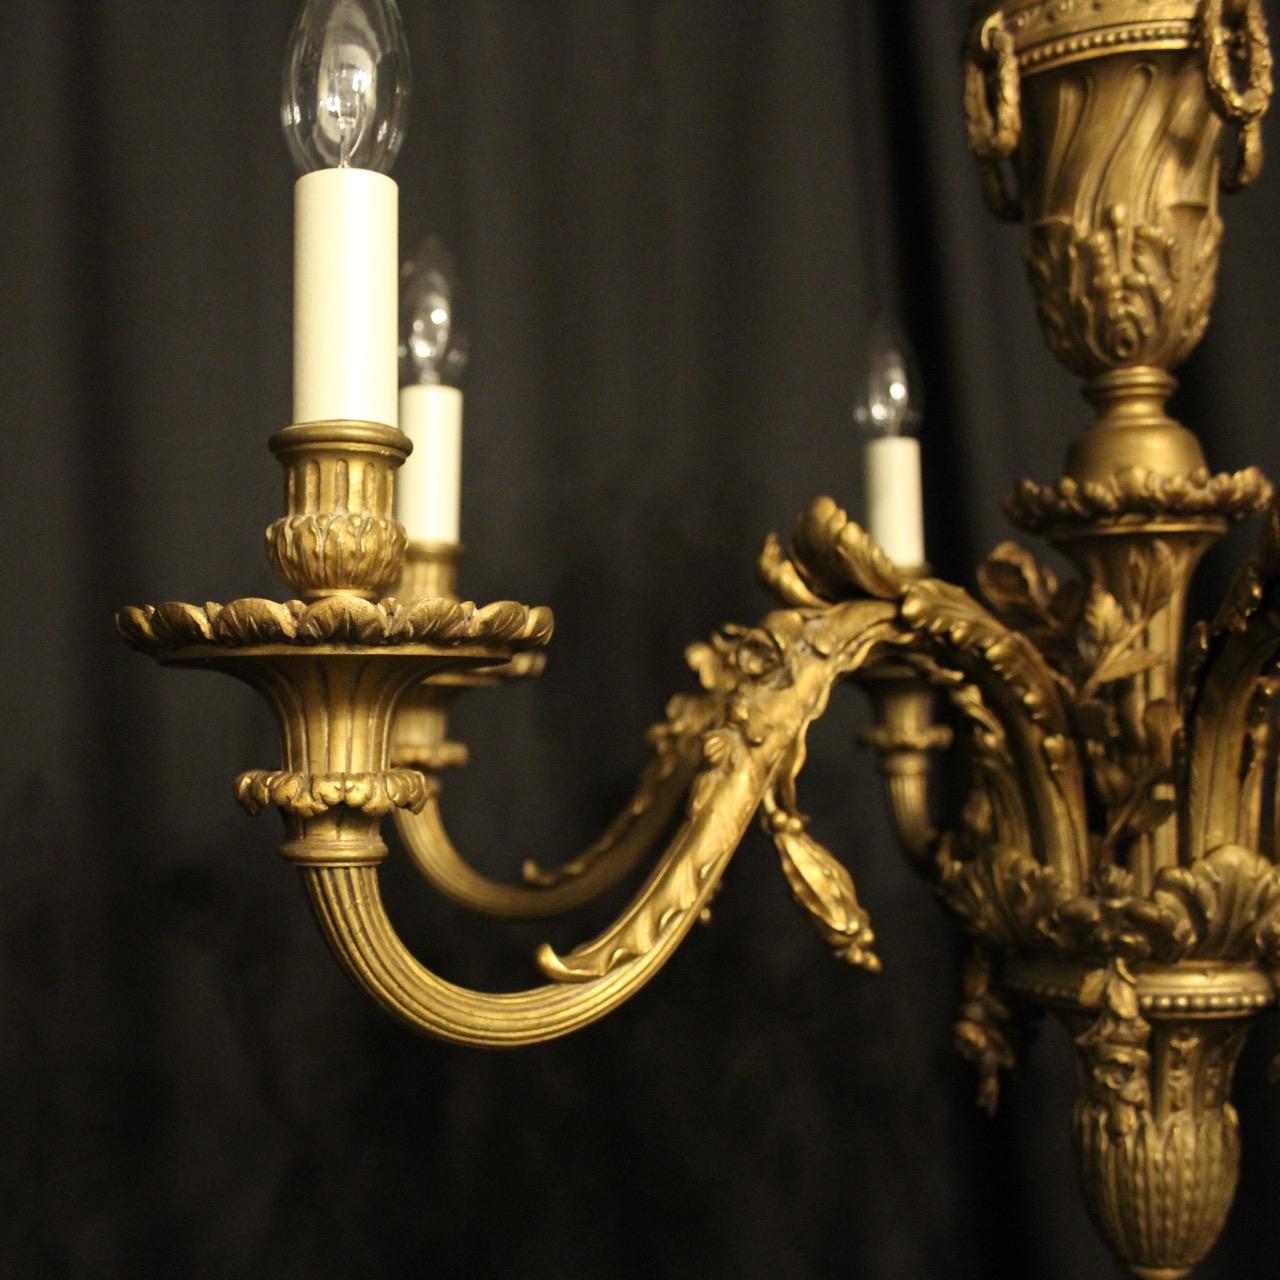 A quality French gilded cast bronze 6-light antique chandelier, the ornate leaf clad scrolling arms with reeded trumpet bobeche drip pans and bulbous candle sconces, issuing from an elongated central urn column with four laurel rings and super leaf